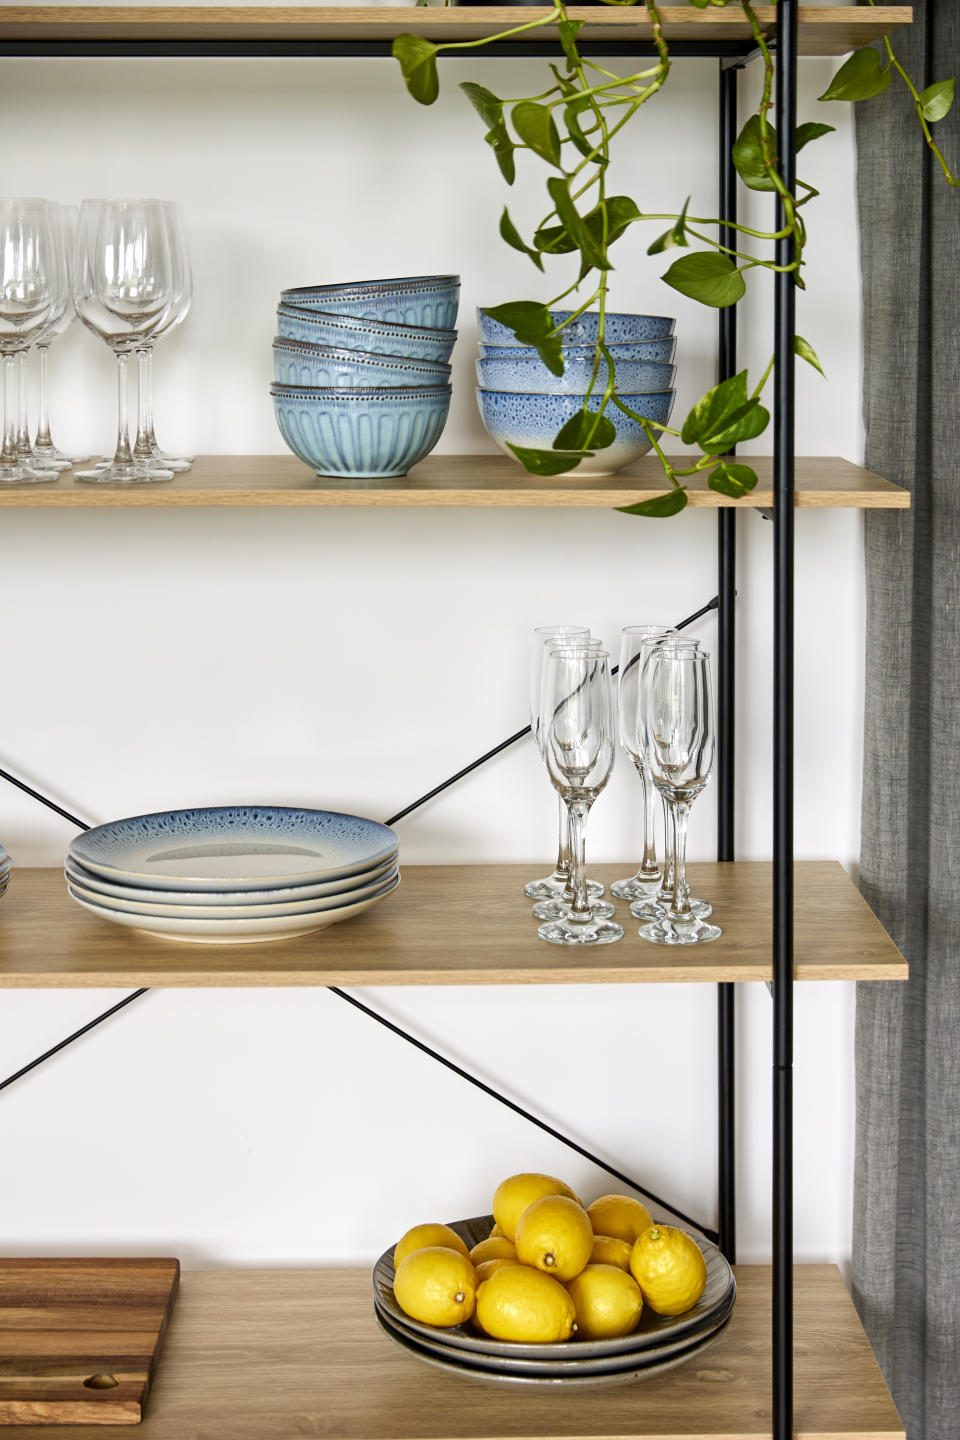 There will be a wide range of items in the new collection from decor to big furniture items like shelving units. Photo: Supplied